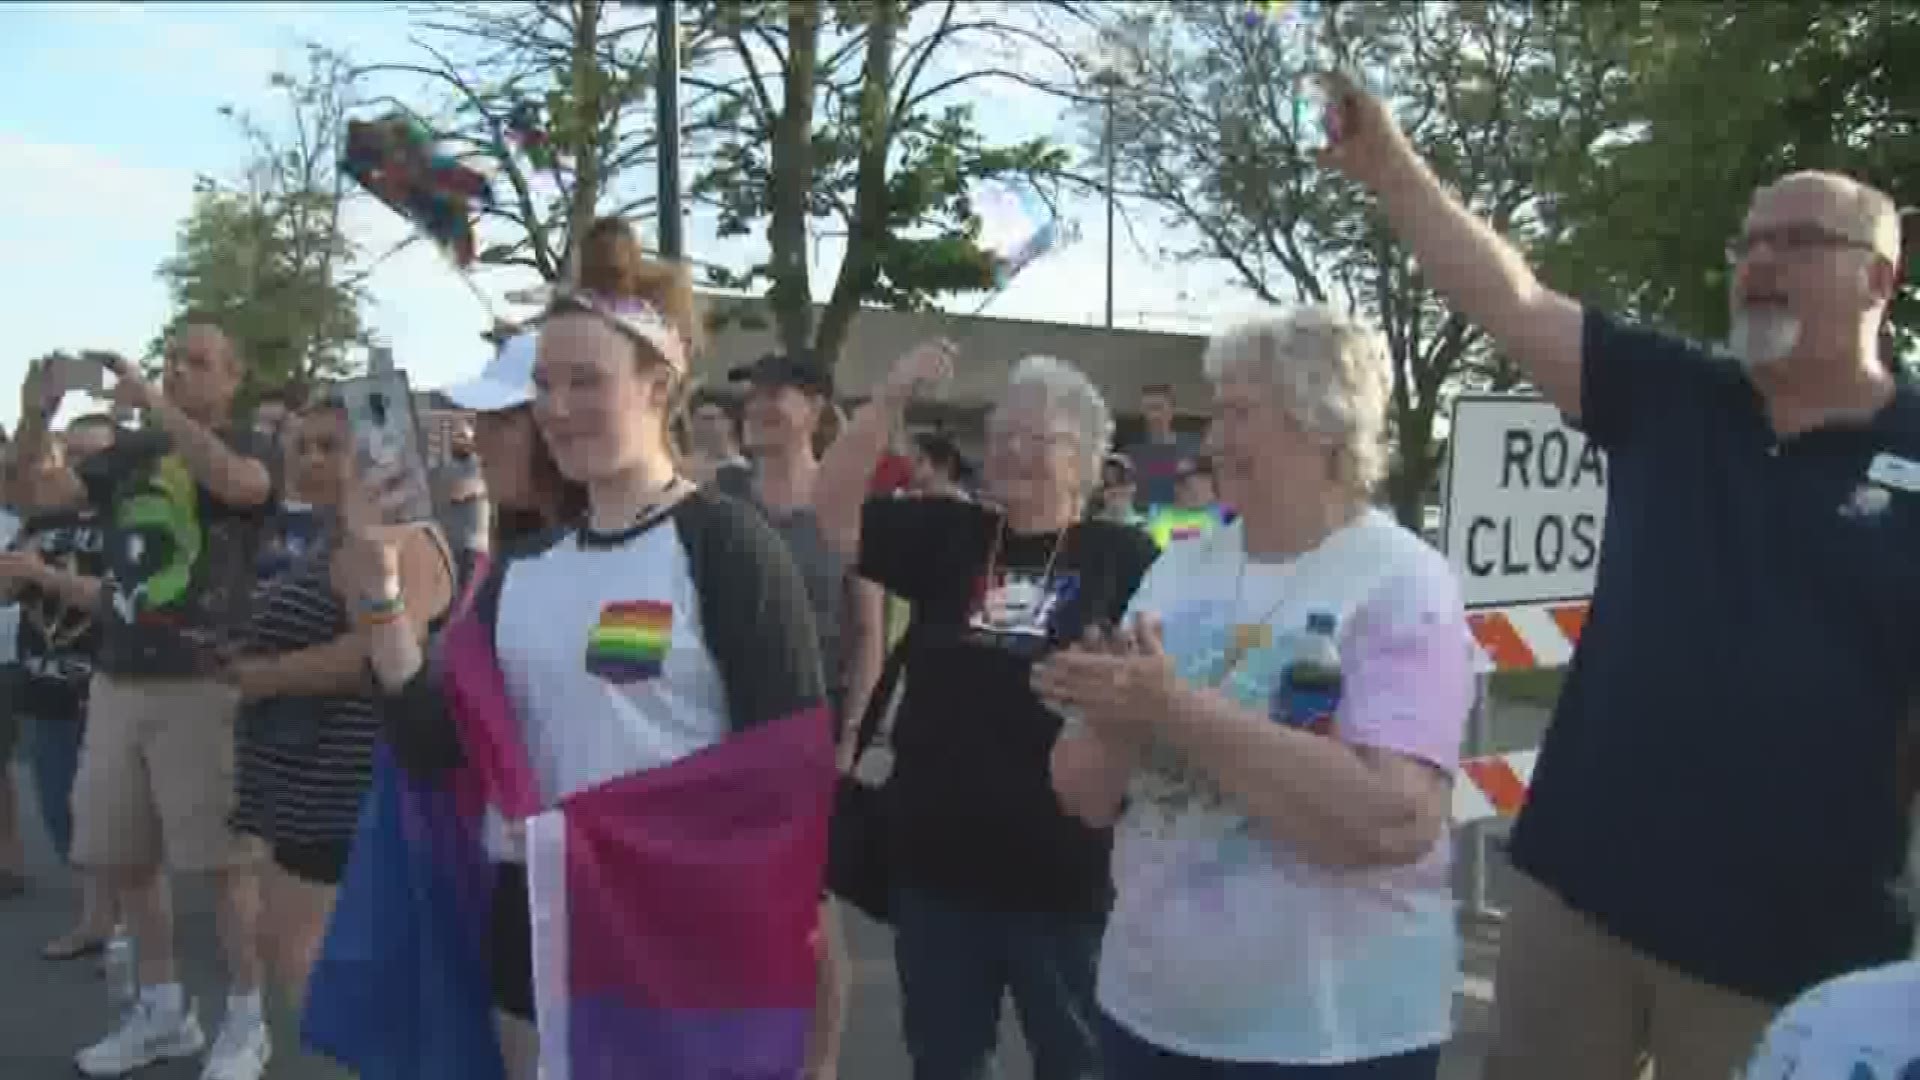 A pride parade was held in the City of Batavia this evening. Organizers tell us more than 350 people participated in the parade and festival.